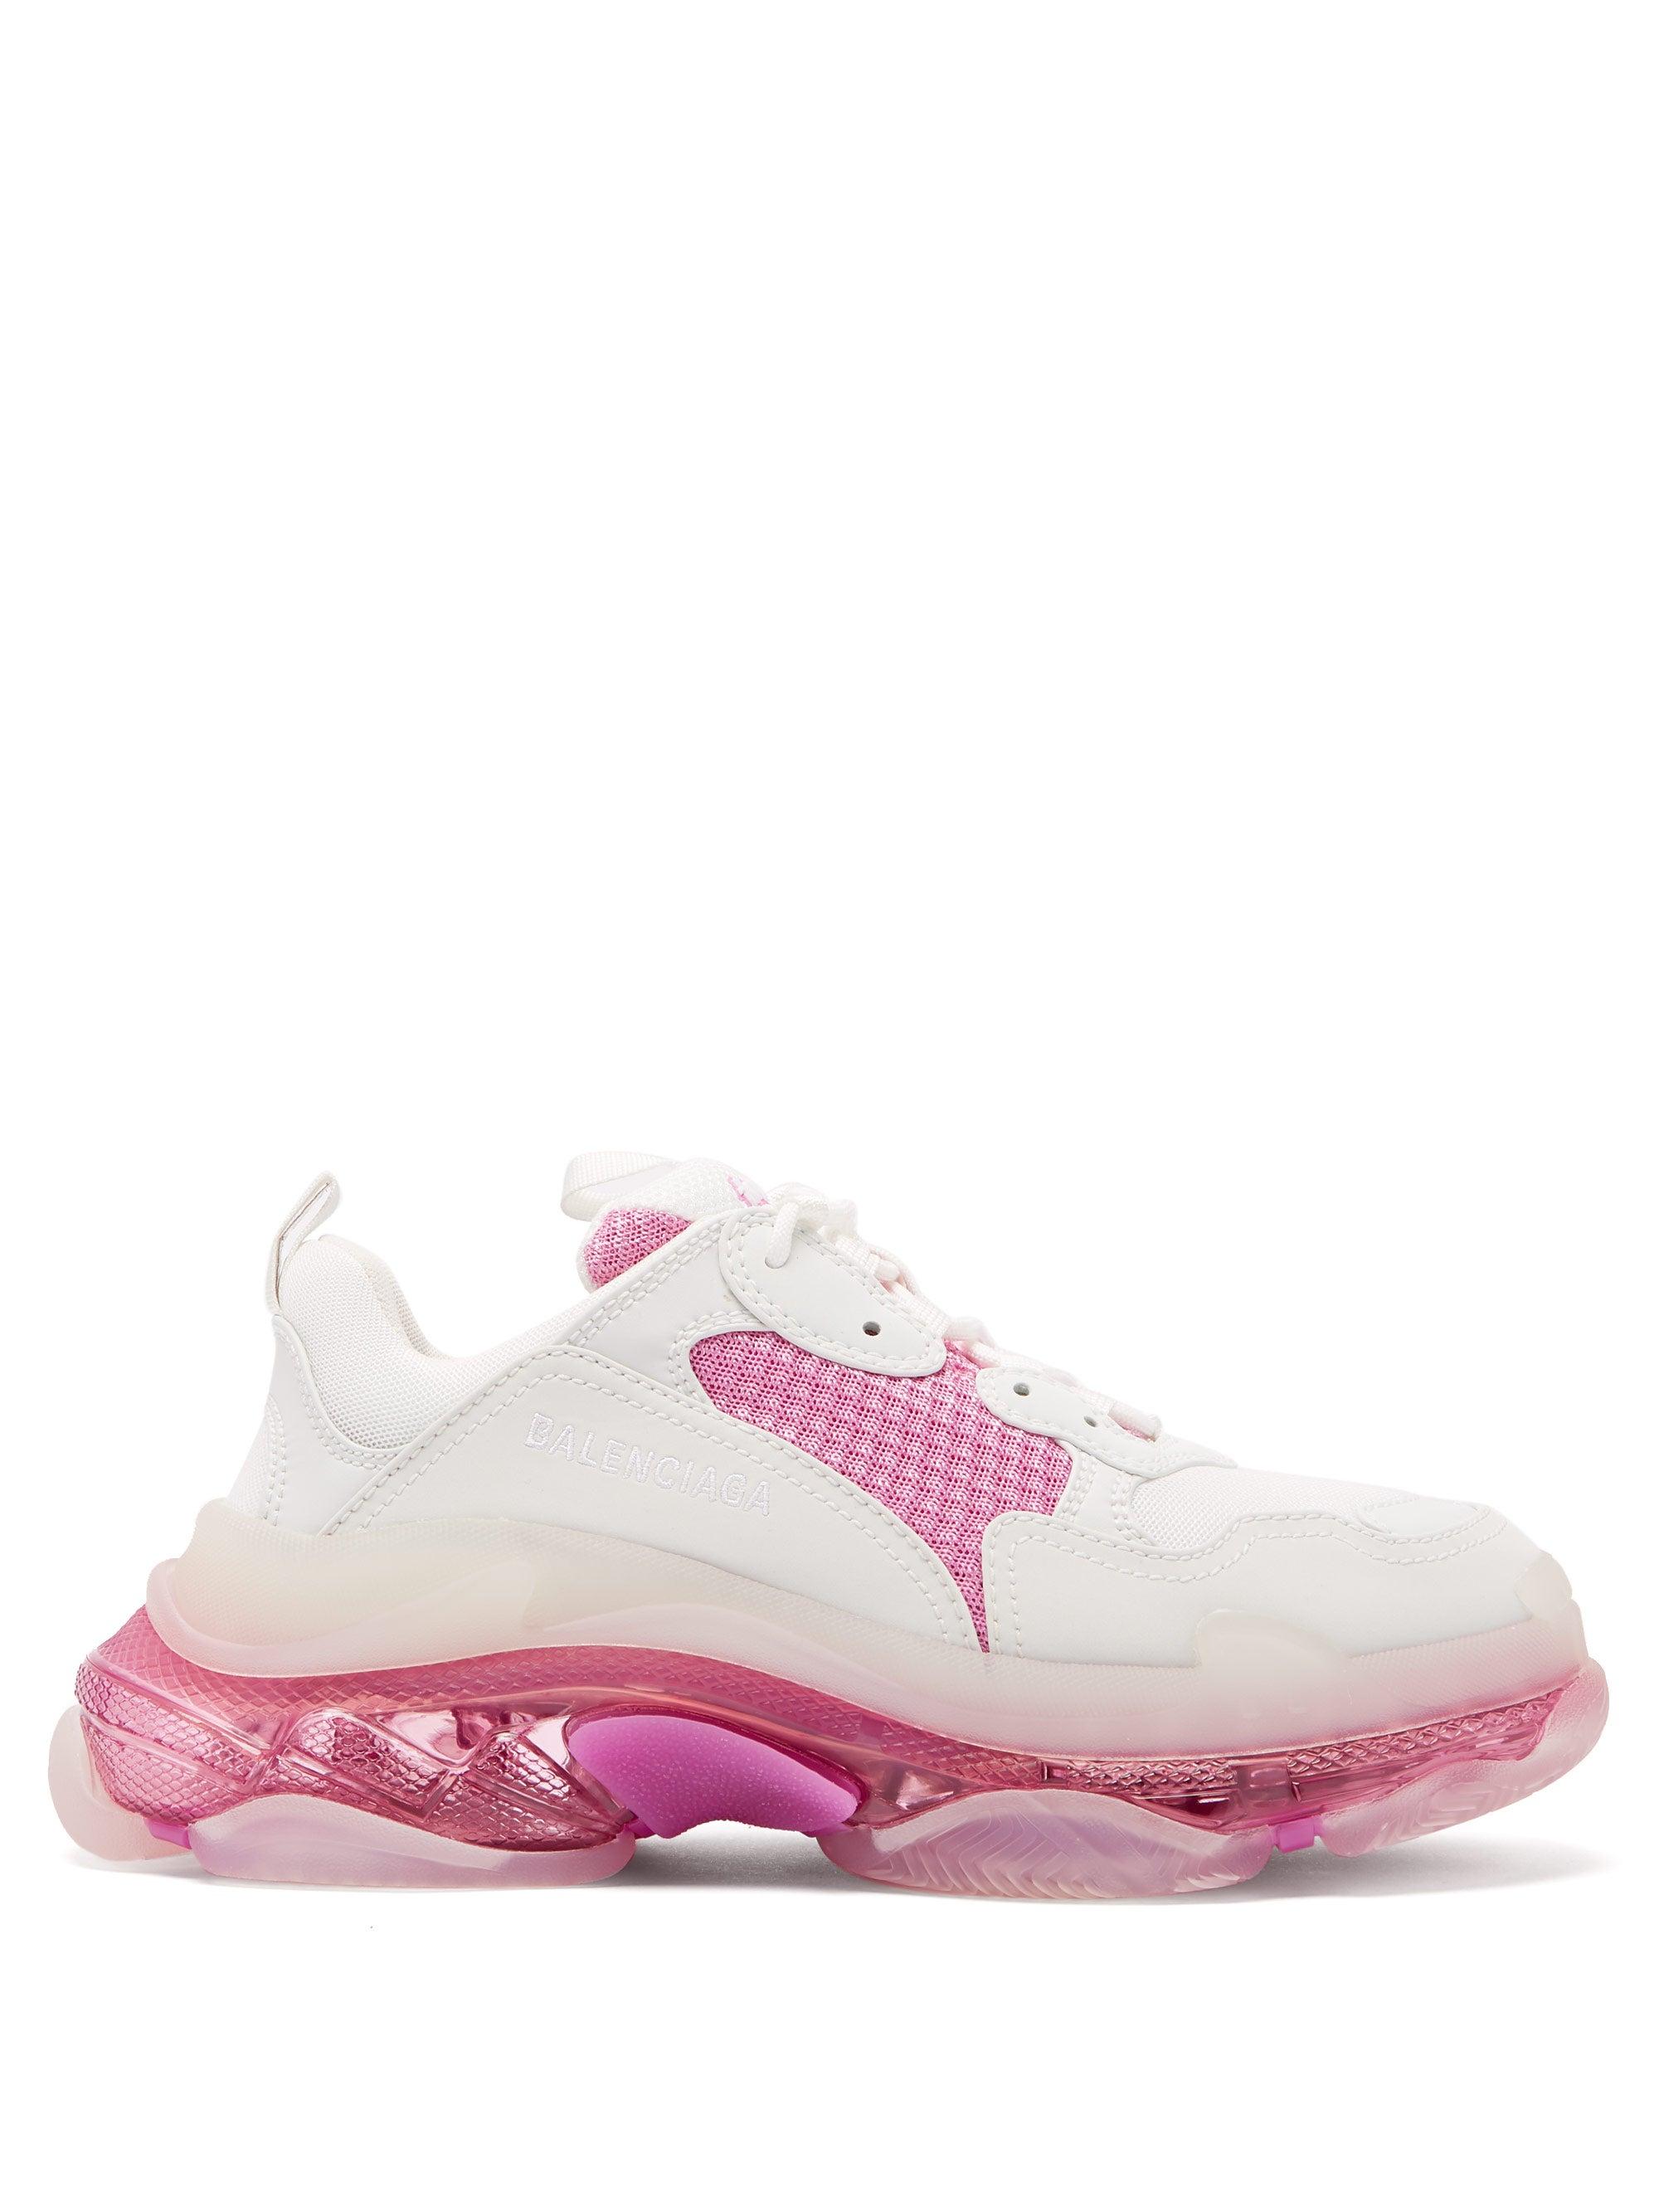 Balenciaga Leather Triple S Clear Sole Sneaker in White/Pink (Pink) - Lyst